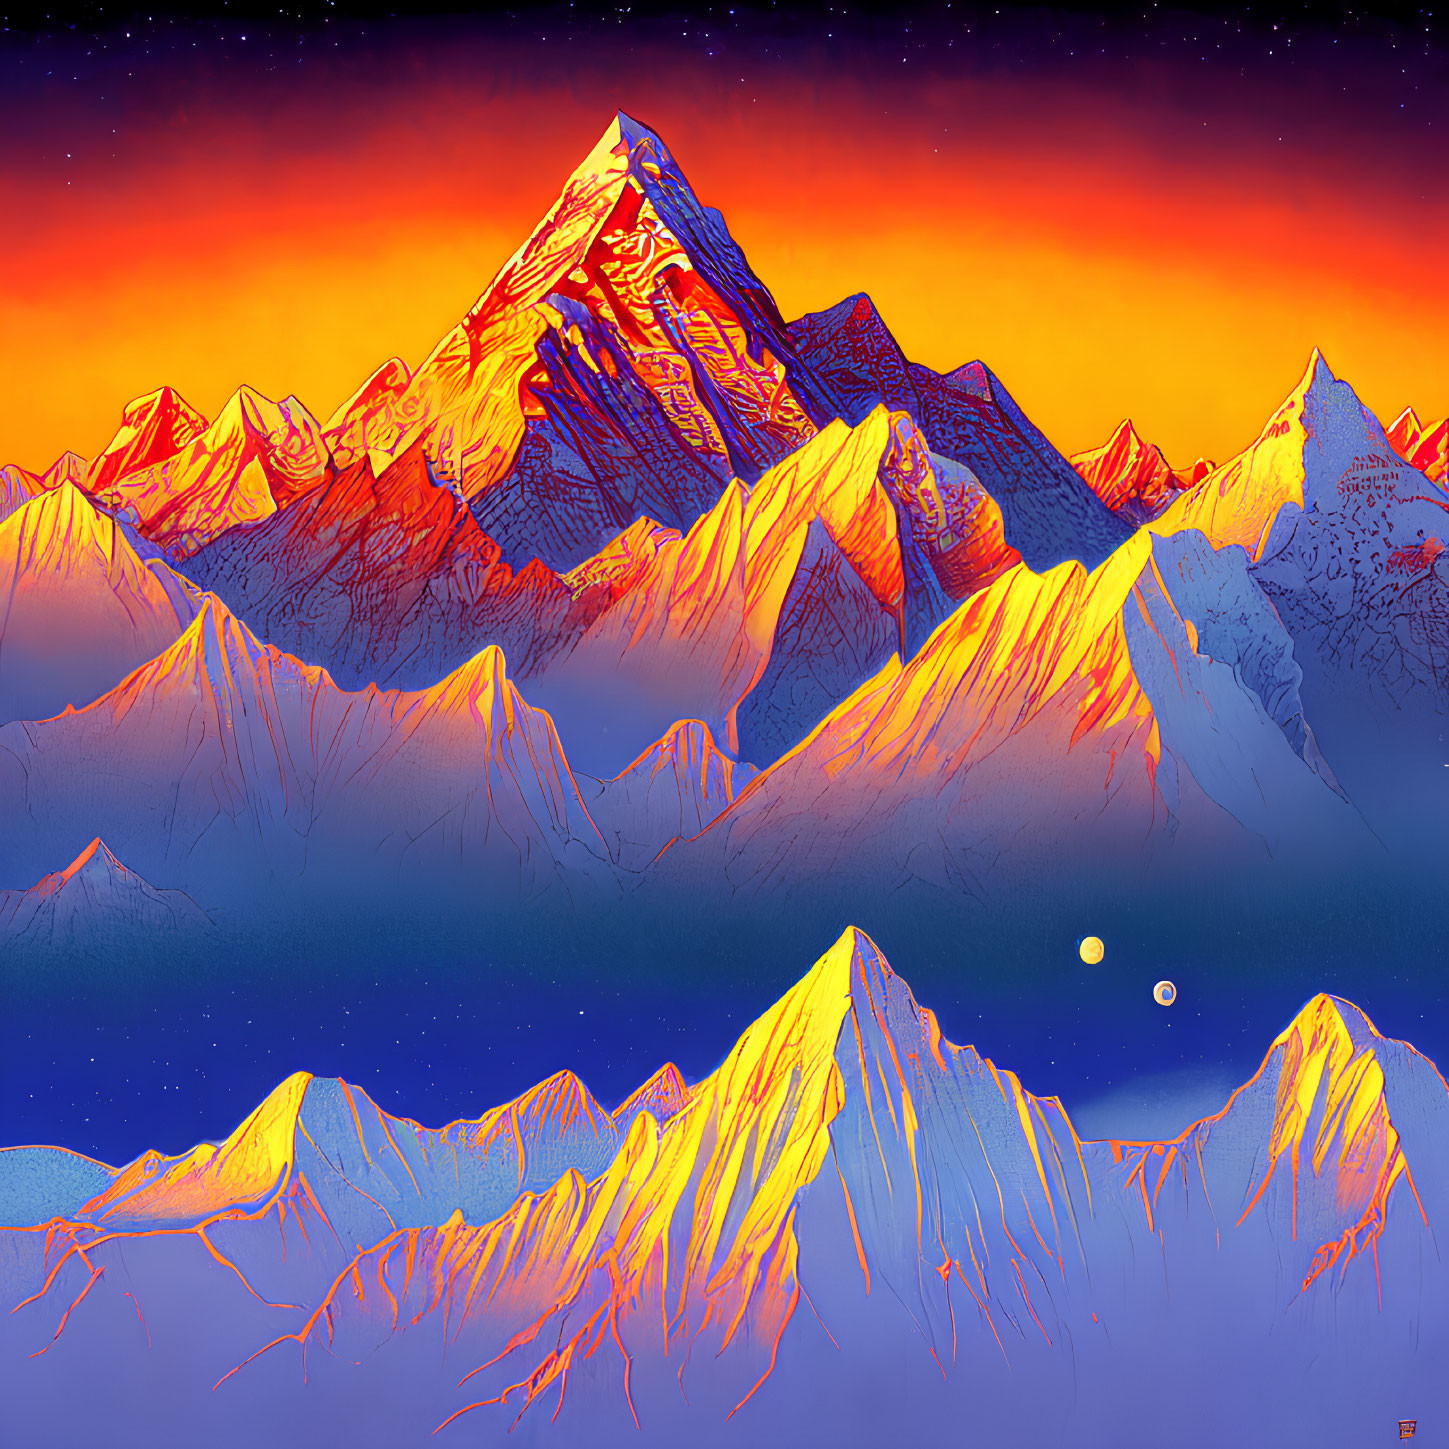 Scenic digital illustration: mountain range at sunset with fiery clouds, tranquil lake, and two moons.